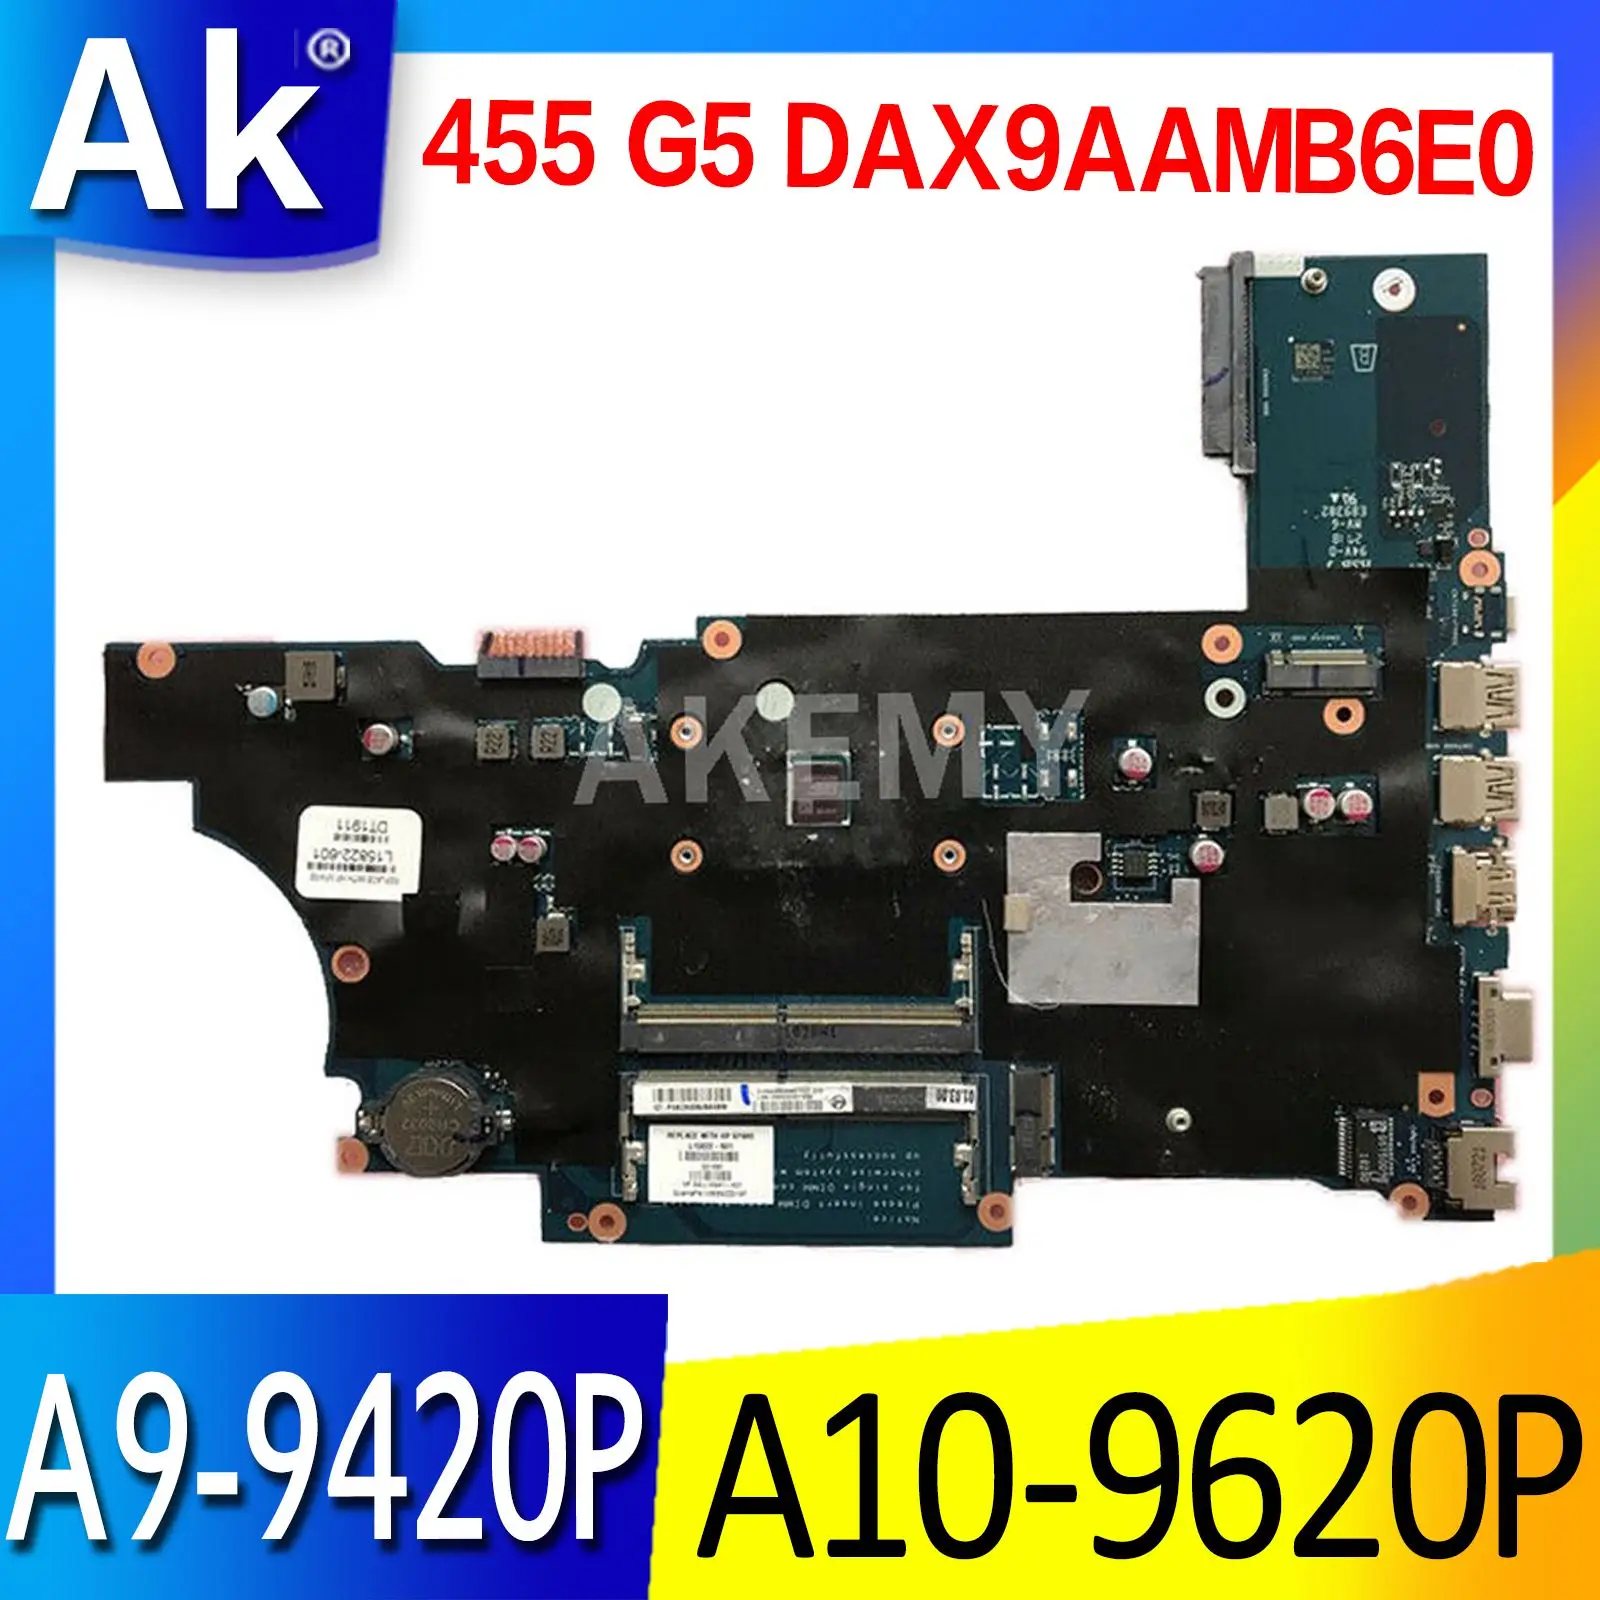 

For HP PROBOOK 455 G5 Laptop Motherboard Mainboard With A9-9420P A10-9620P AMD CPU DAX9AAMB6E0 Motherboard 100% Tested Fast Ship